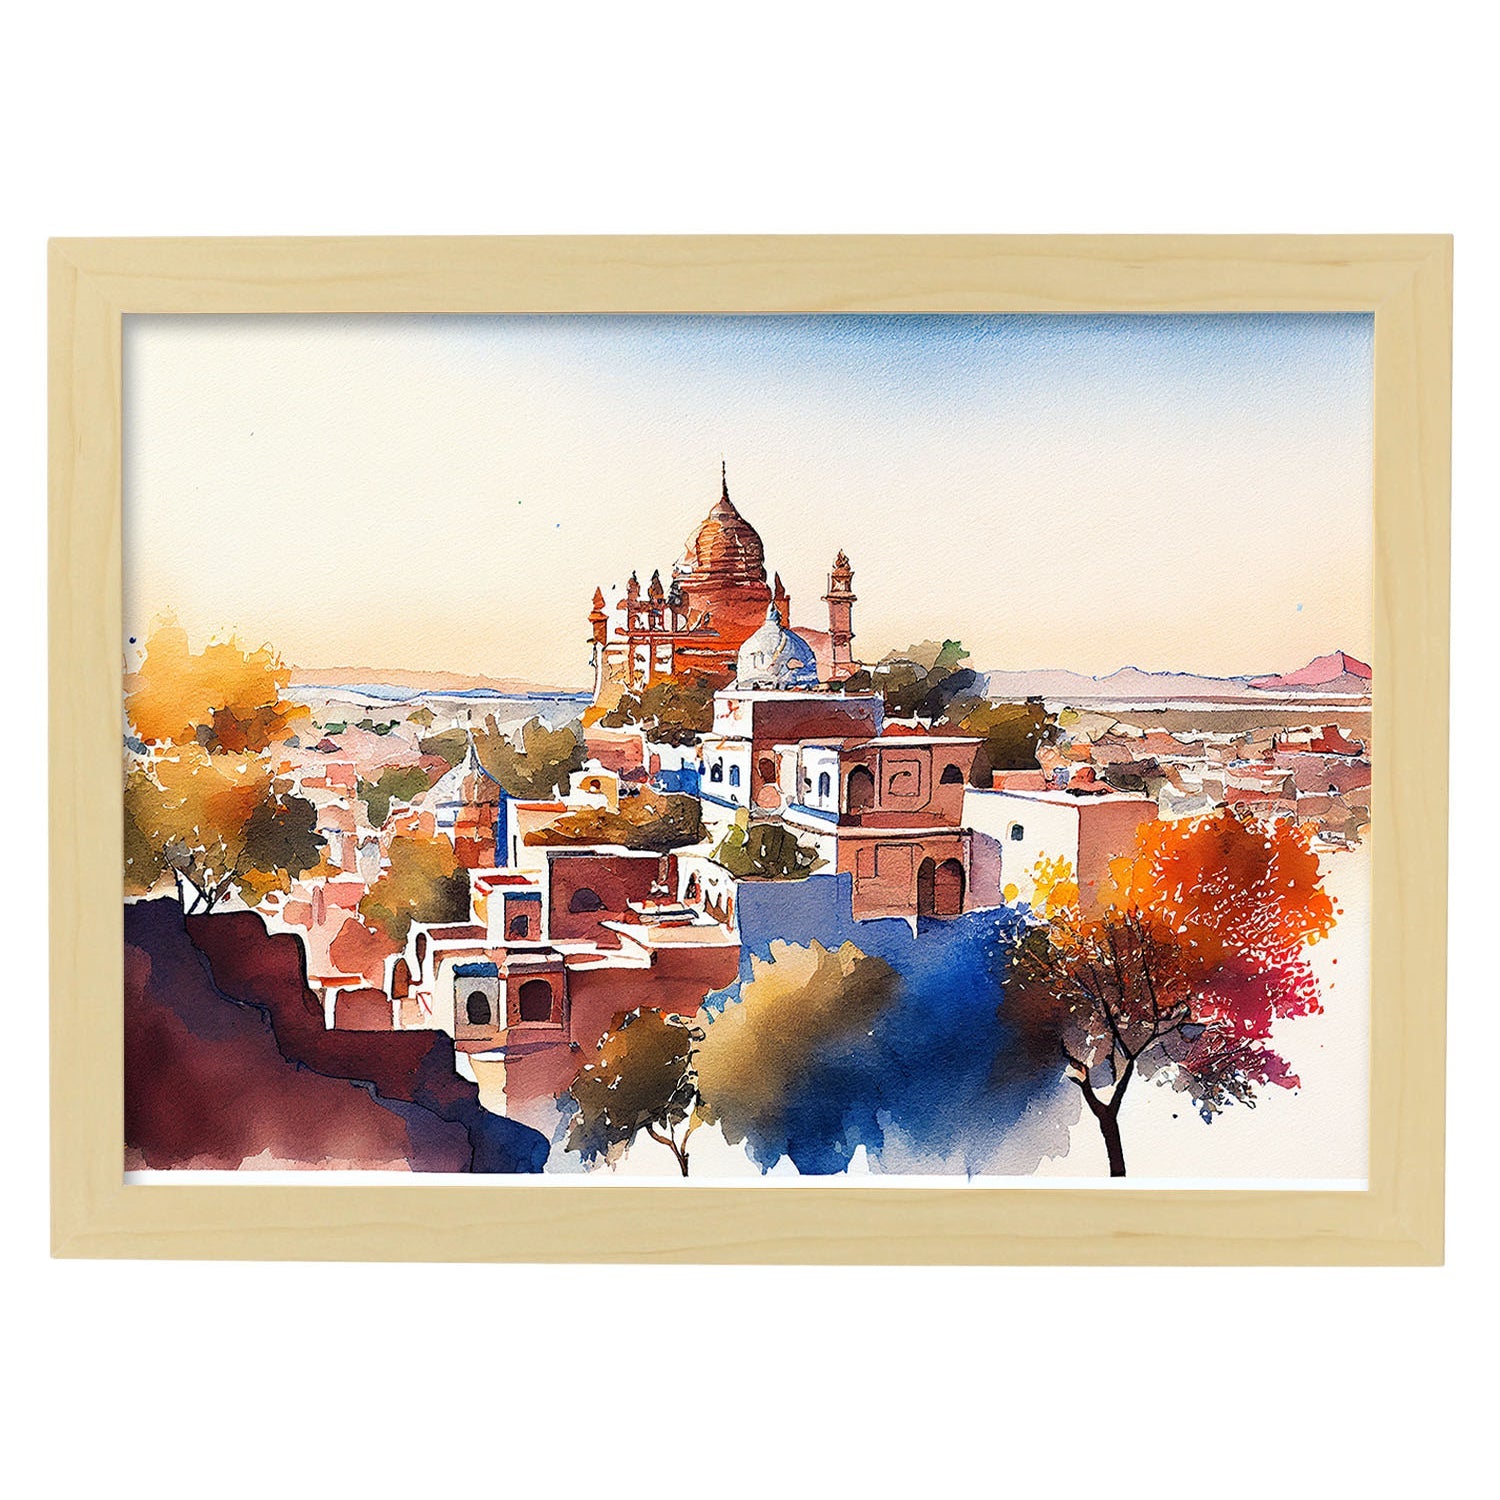 Nacnic watercolor of a skyline of the city of Jodhpur. Aesthetic Wall Art Prints for Bedroom or Living Room Design.-Artwork-Nacnic-A4-Marco Madera Clara-Nacnic Estudio SL